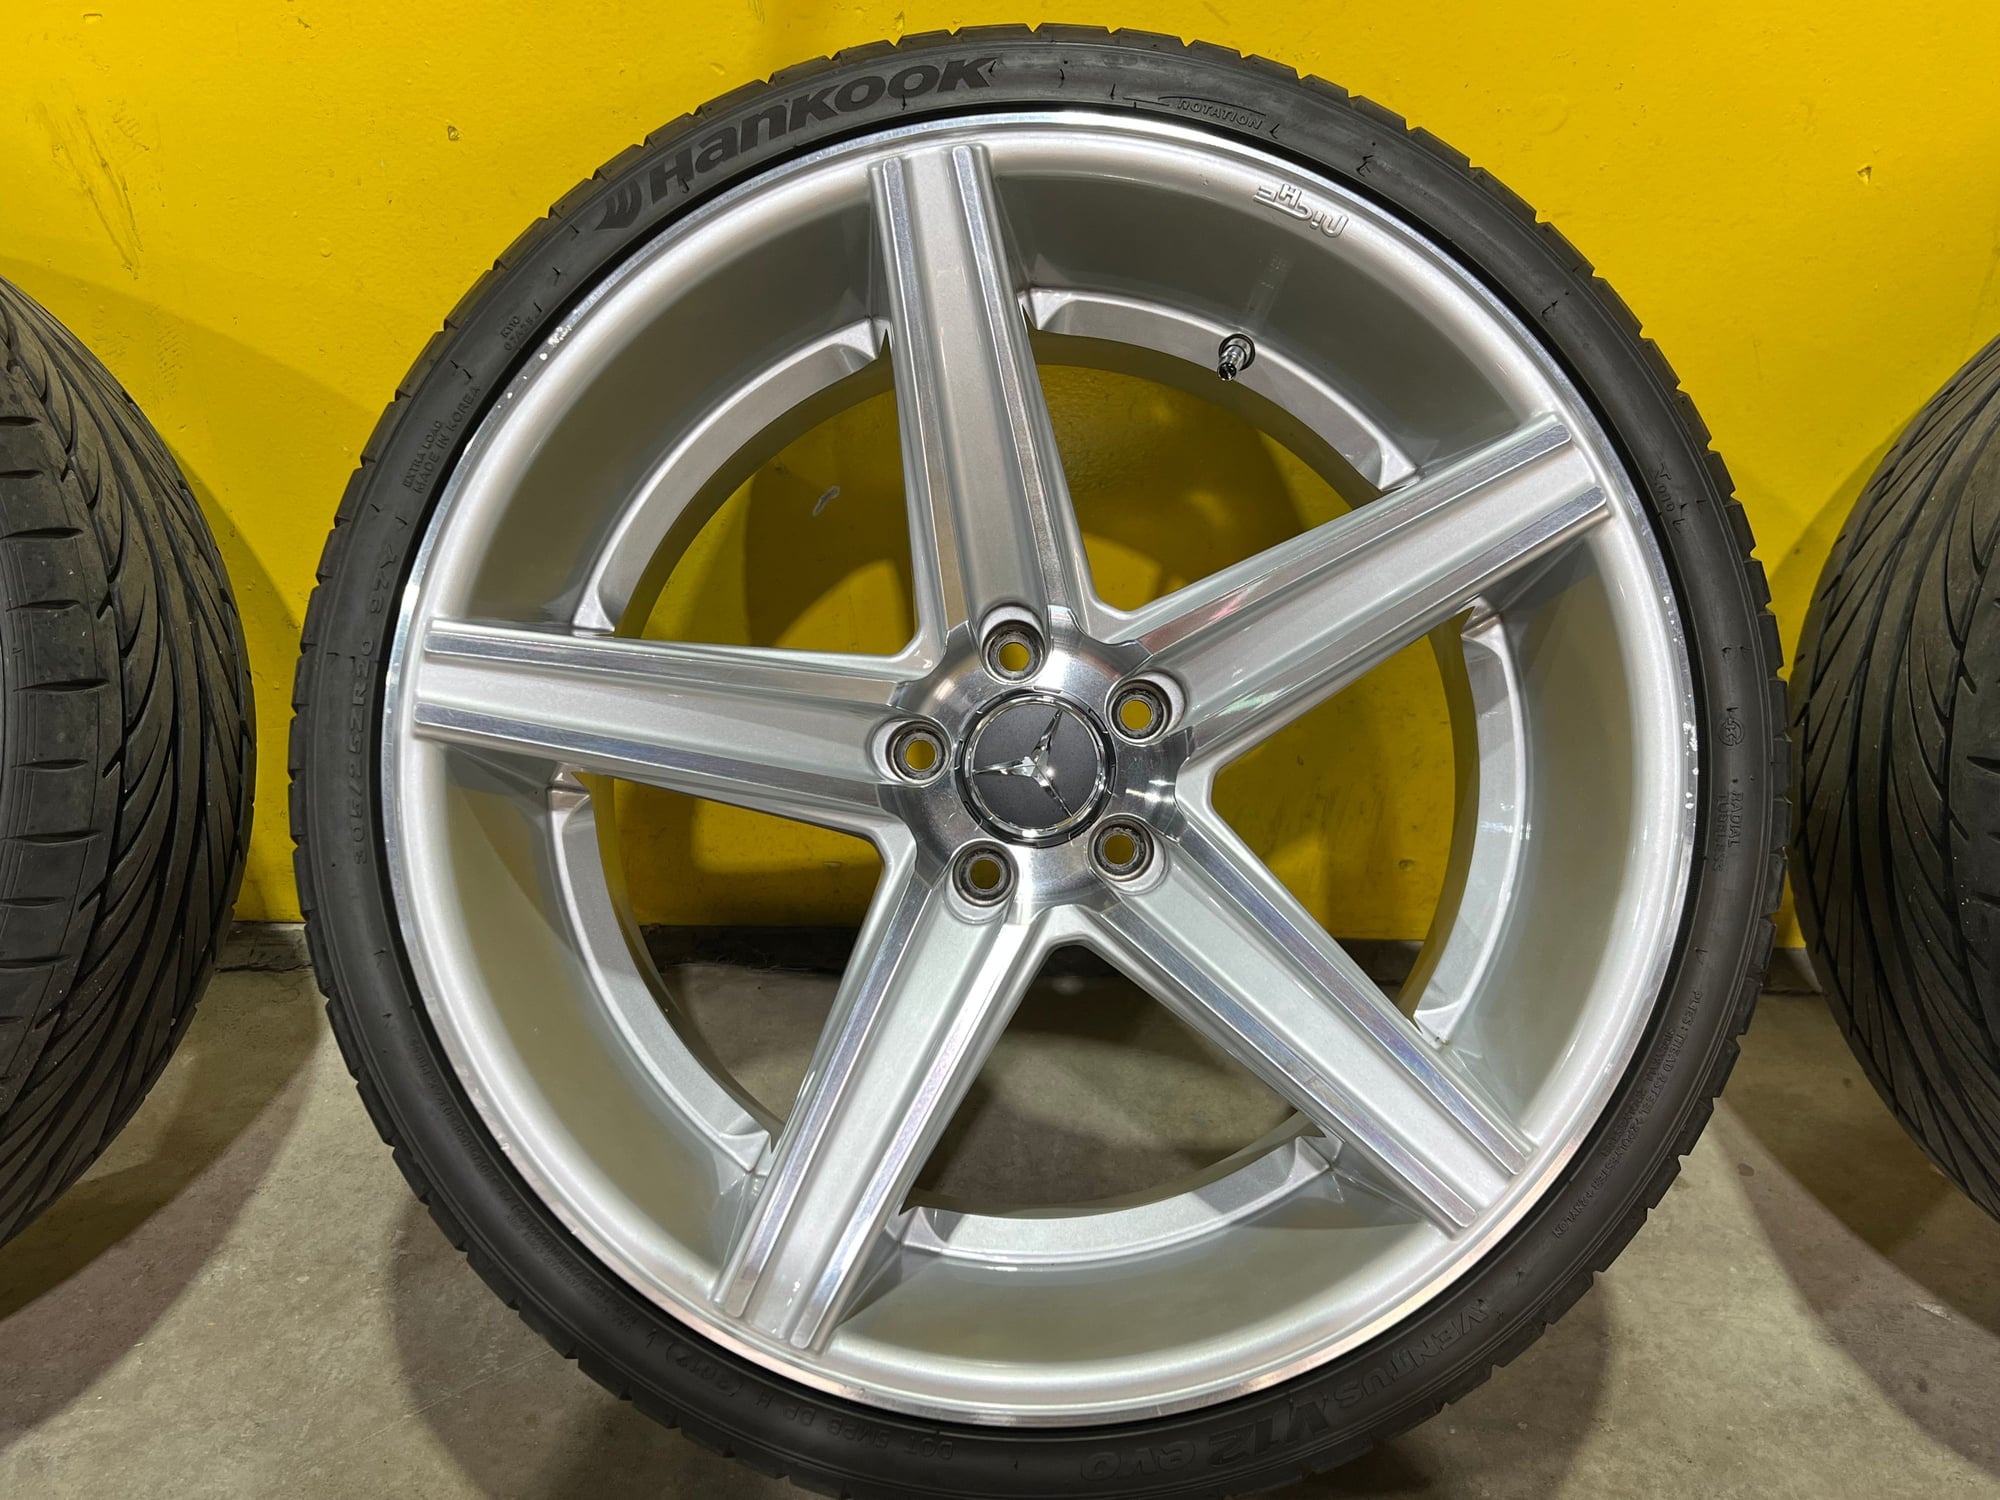 Wheels and Tires/Axles - Mercedes W219 R230 Niche Apex 20x8.5 and 20x10.5 Wheels and Tires - Used - Ny, NY 10101, United States